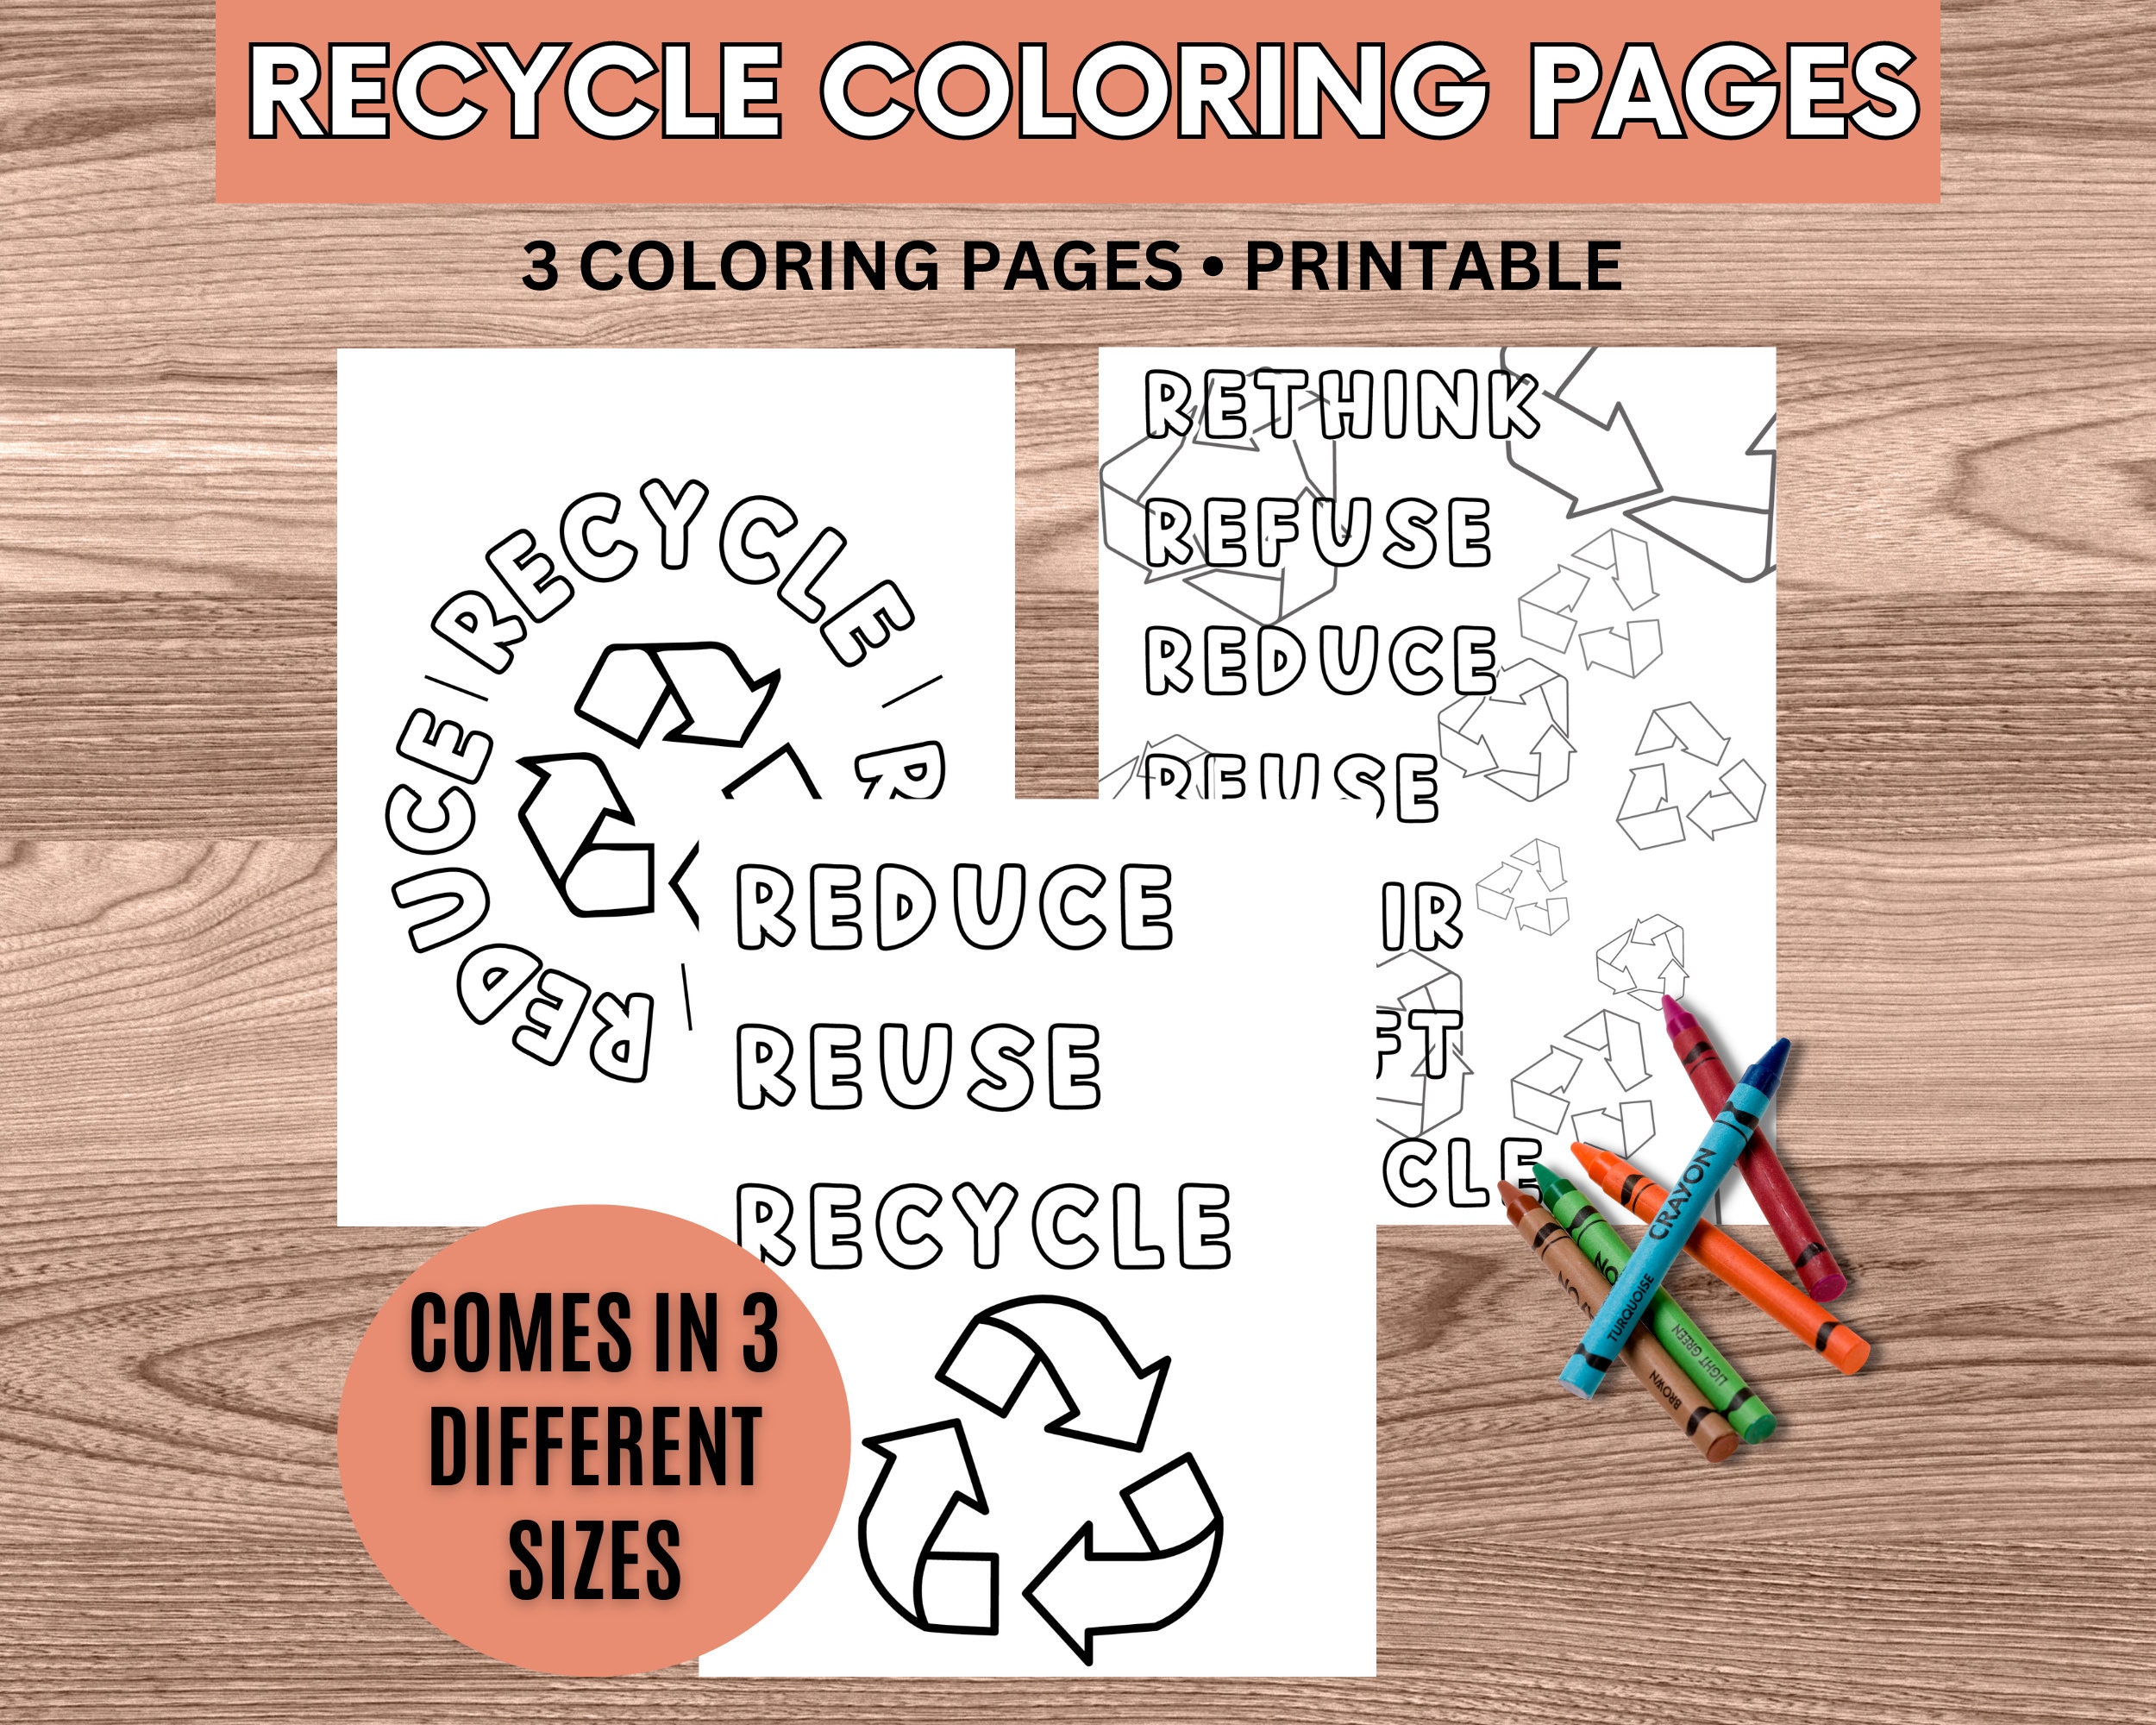 Recycle coloring pages digital download coloring pages earth day coloring pages recycling coloring pages kid coloring pages